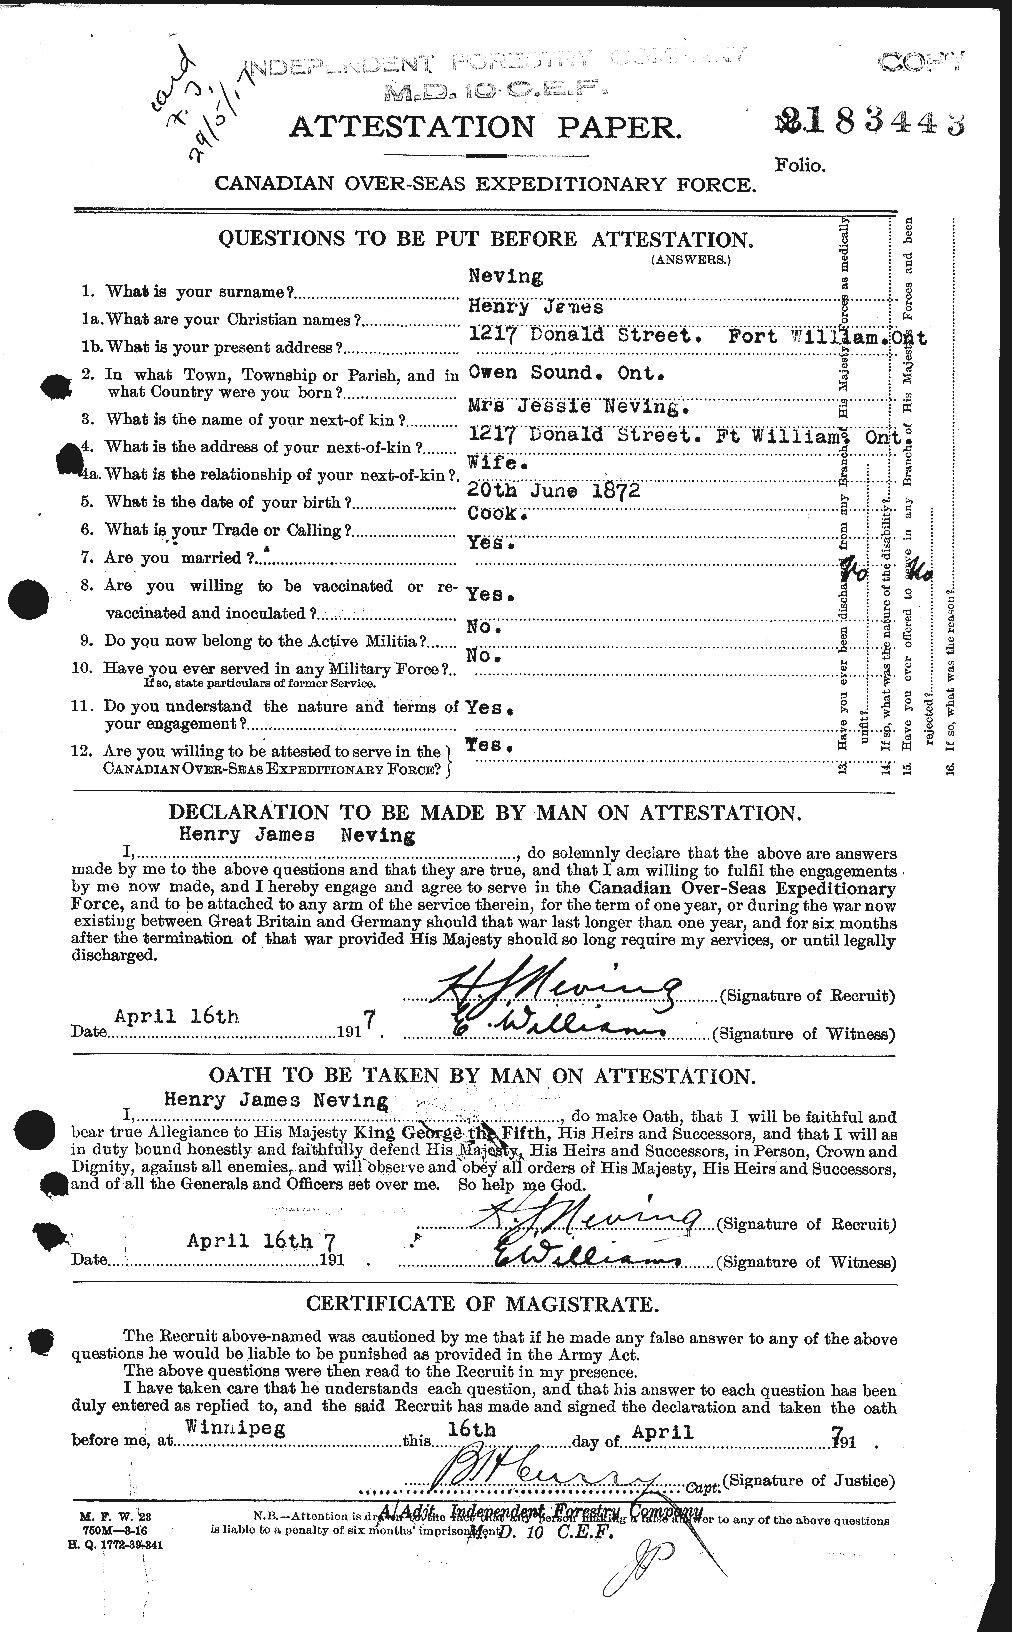 Personnel Records of the First World War - CEF 550453a